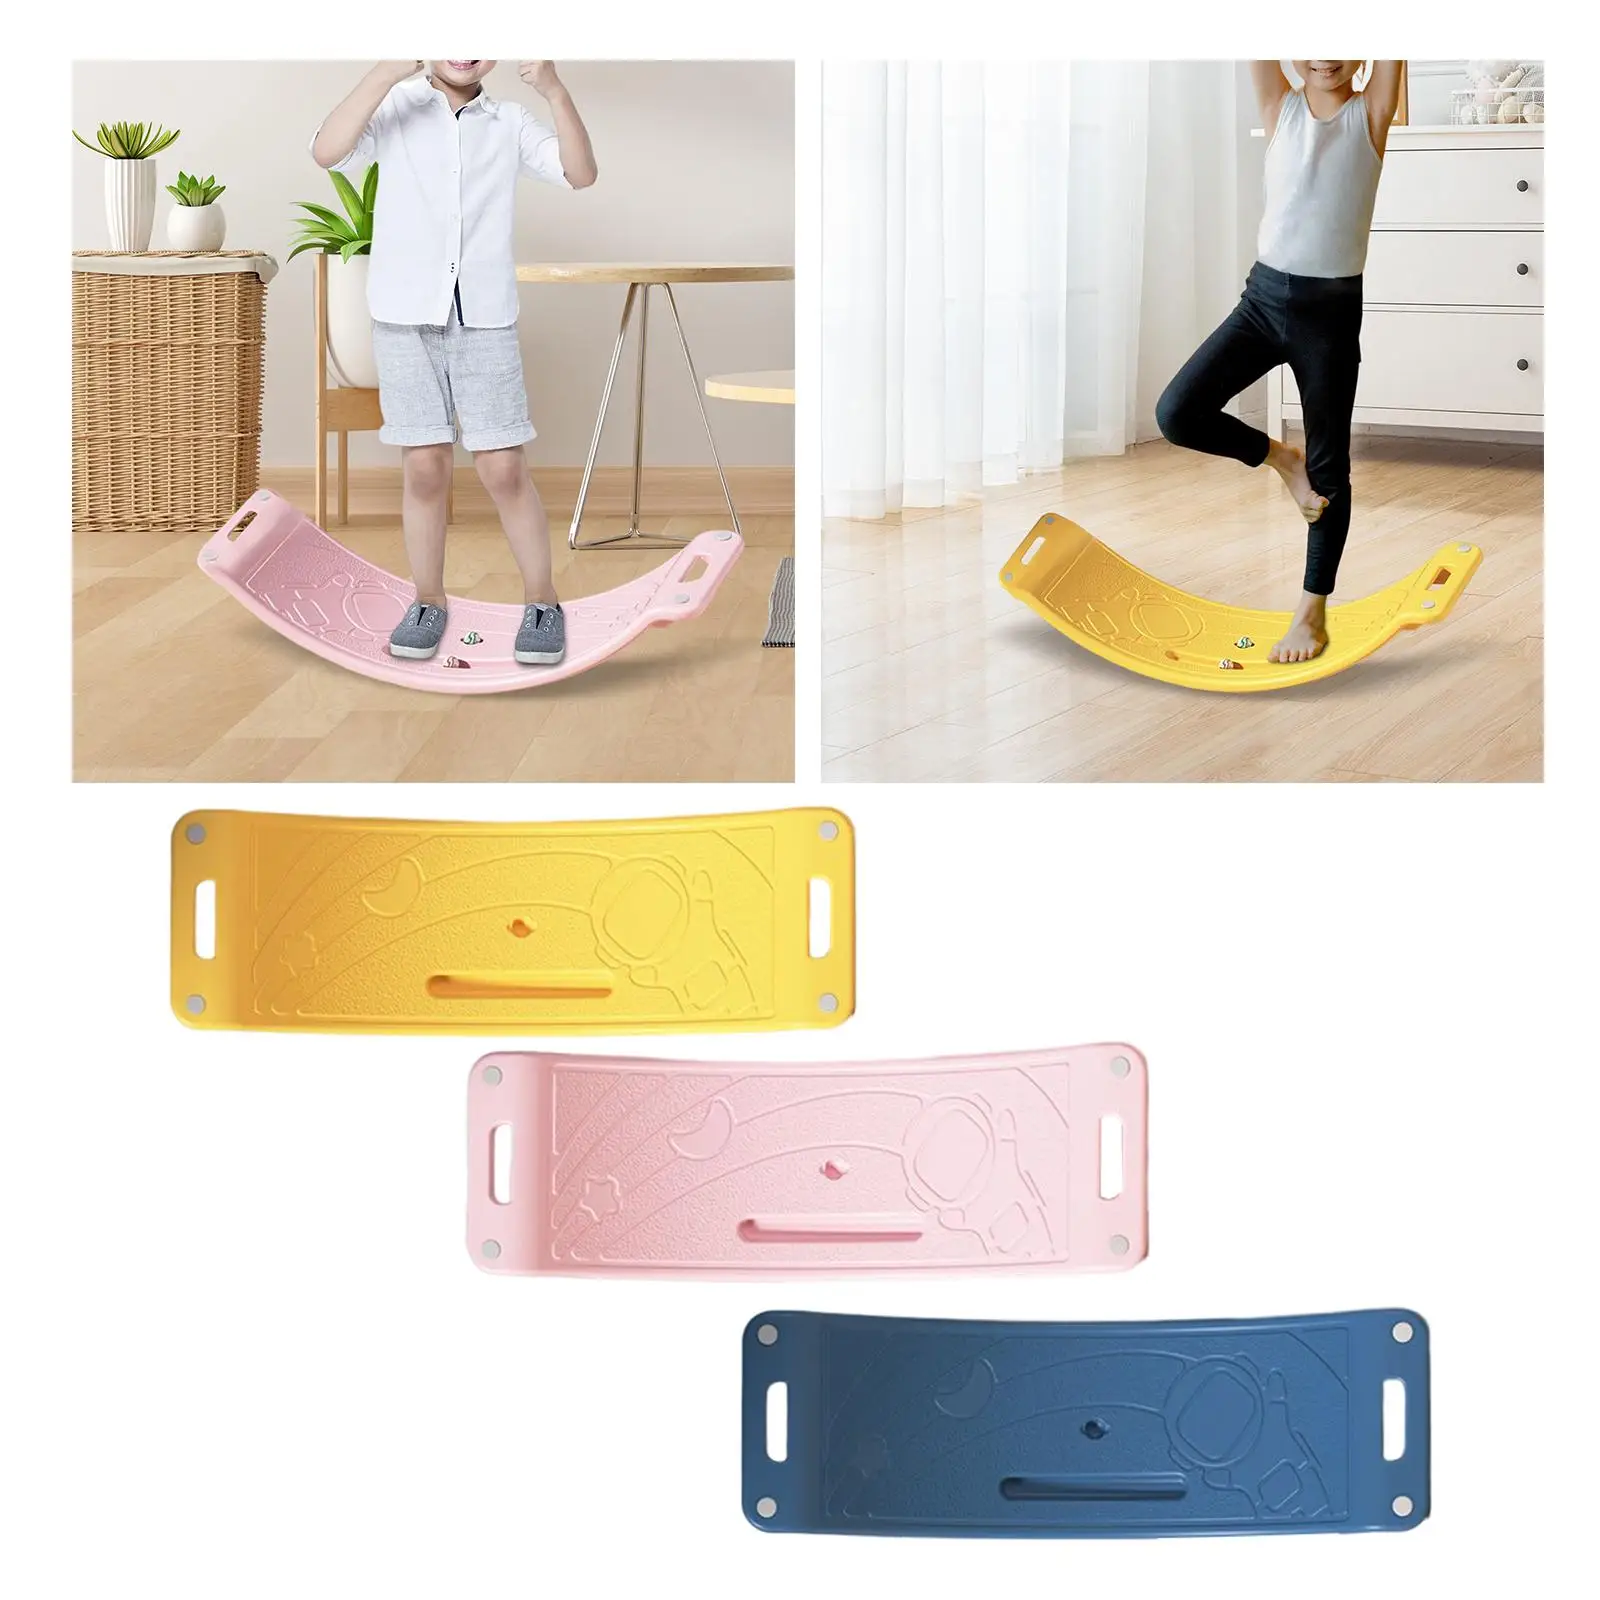 Multifunctional Balance Board Rocking Games for Workout Training Accessory